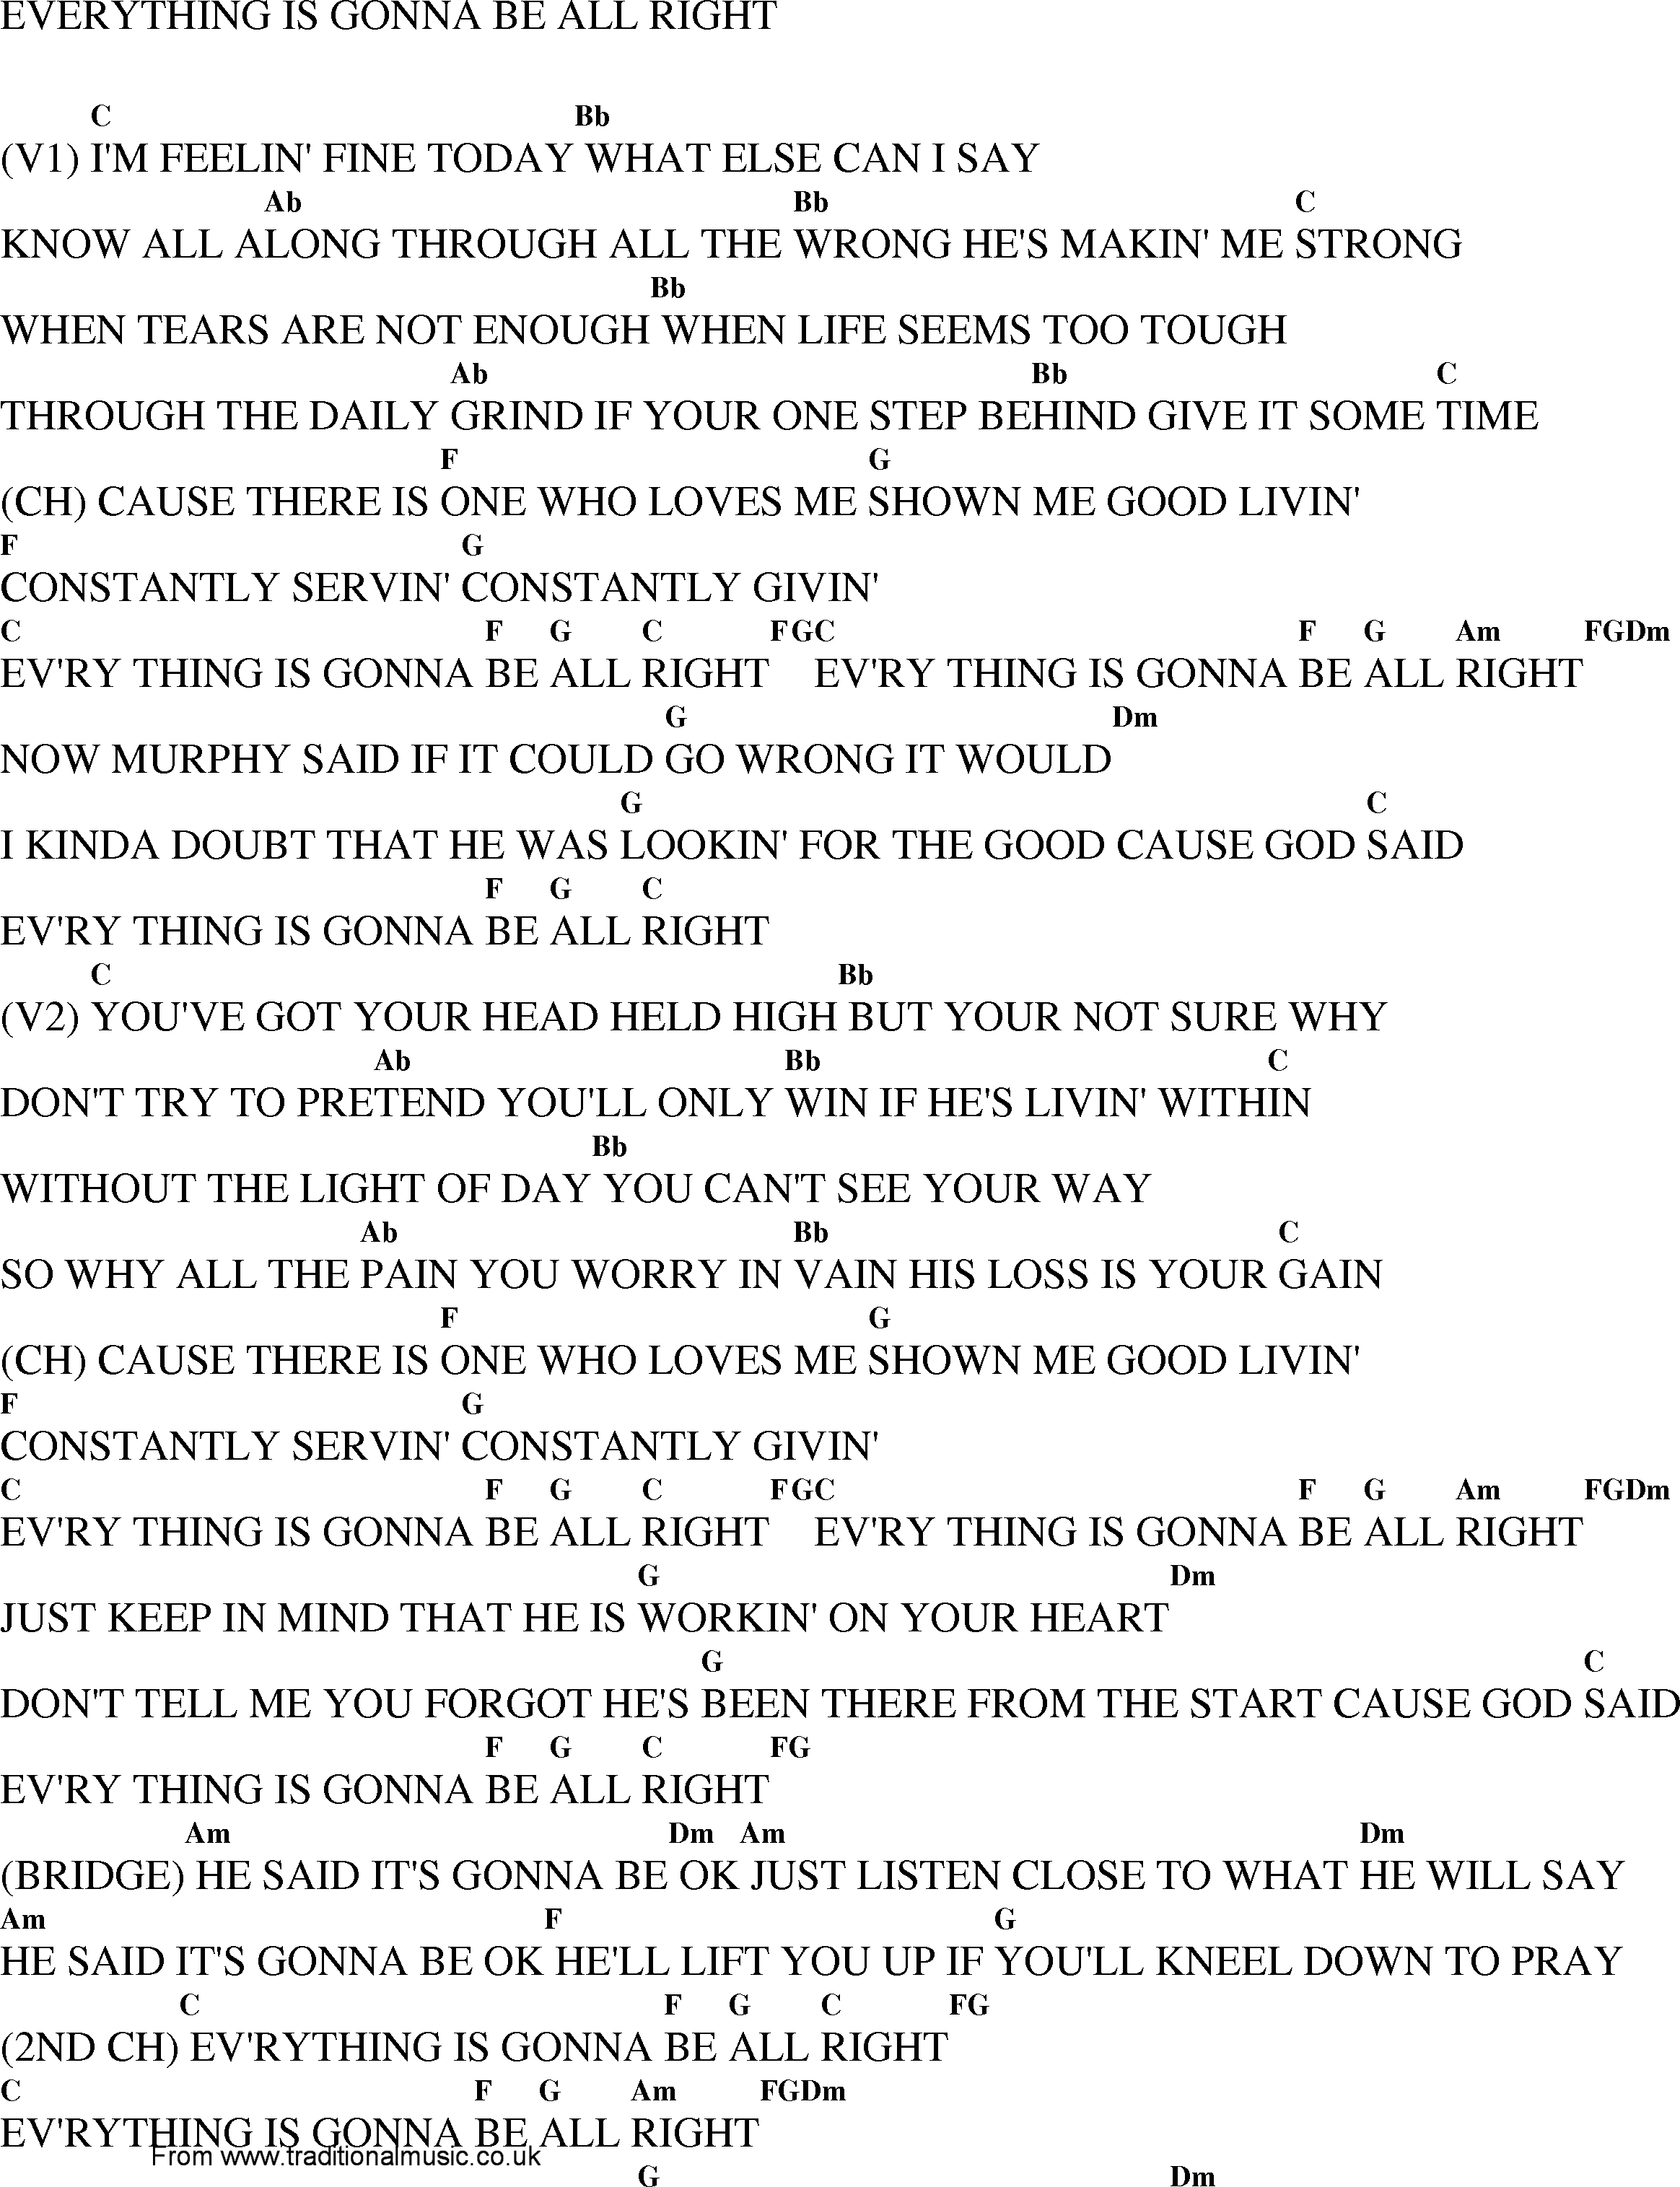 Gospel Song: everything_is_gonna_be_all_right, lyrics and chords.